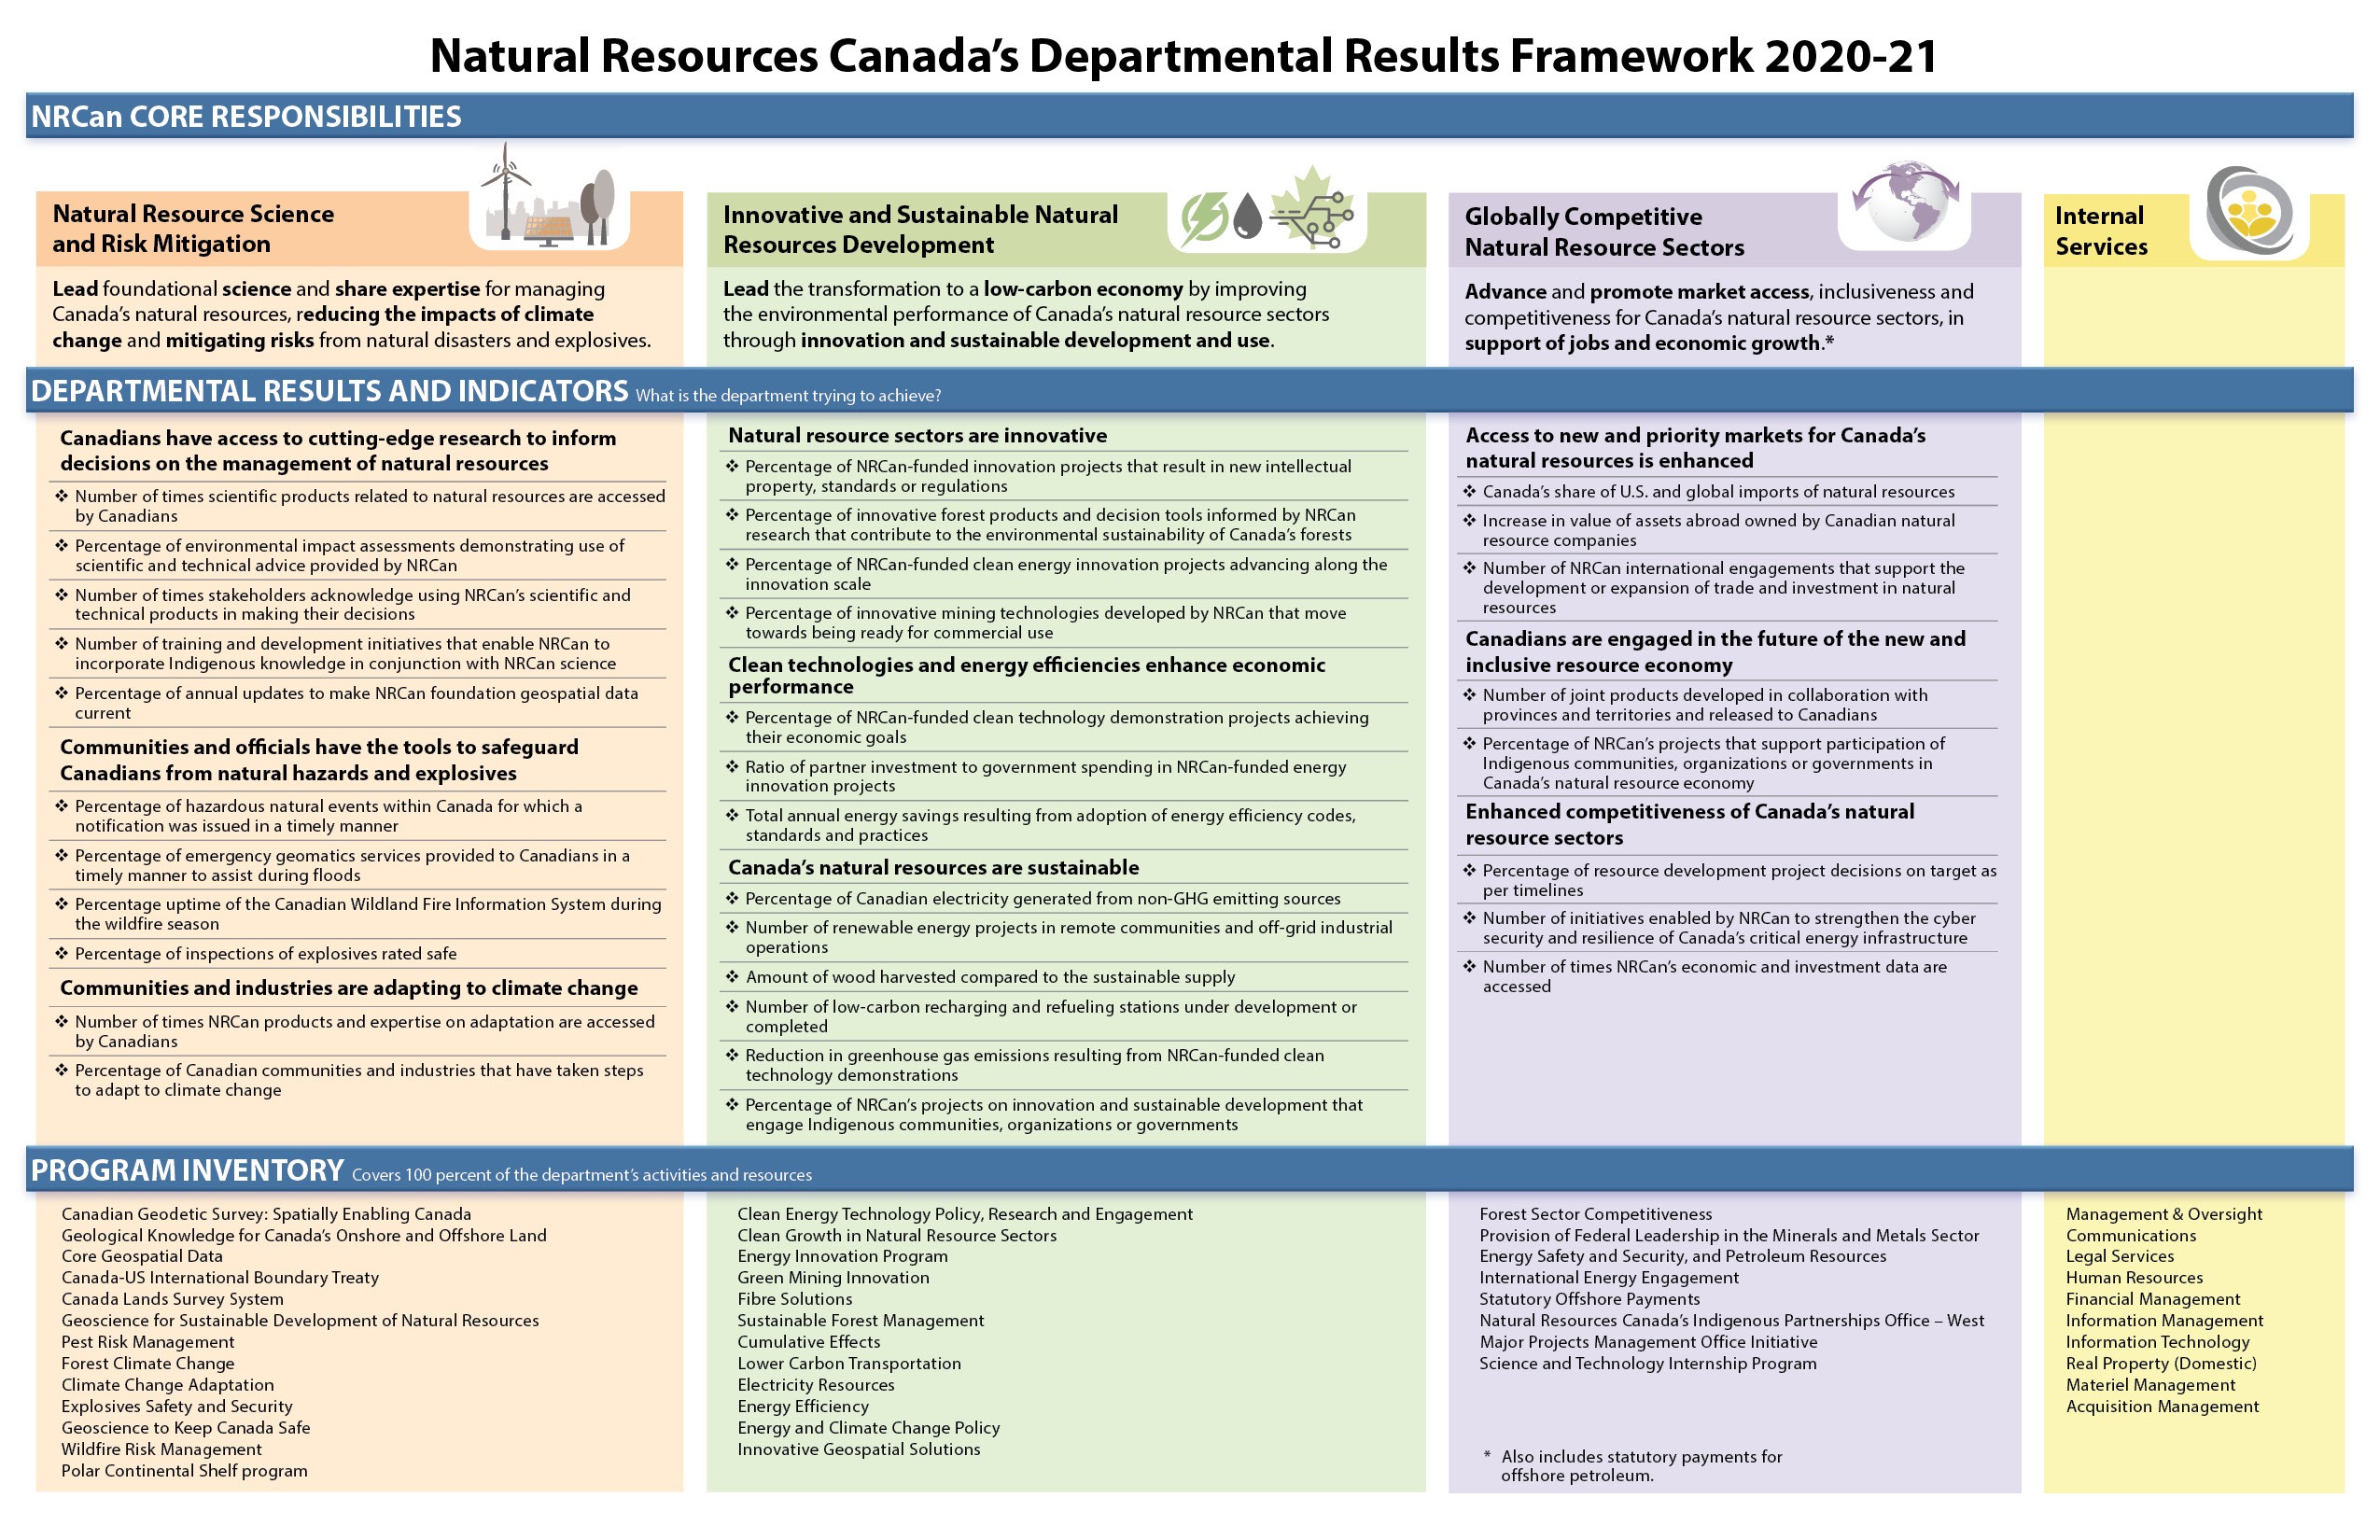 Infographic showing Natural Resources Canada's Departmental Results Frameword for 2020-21.